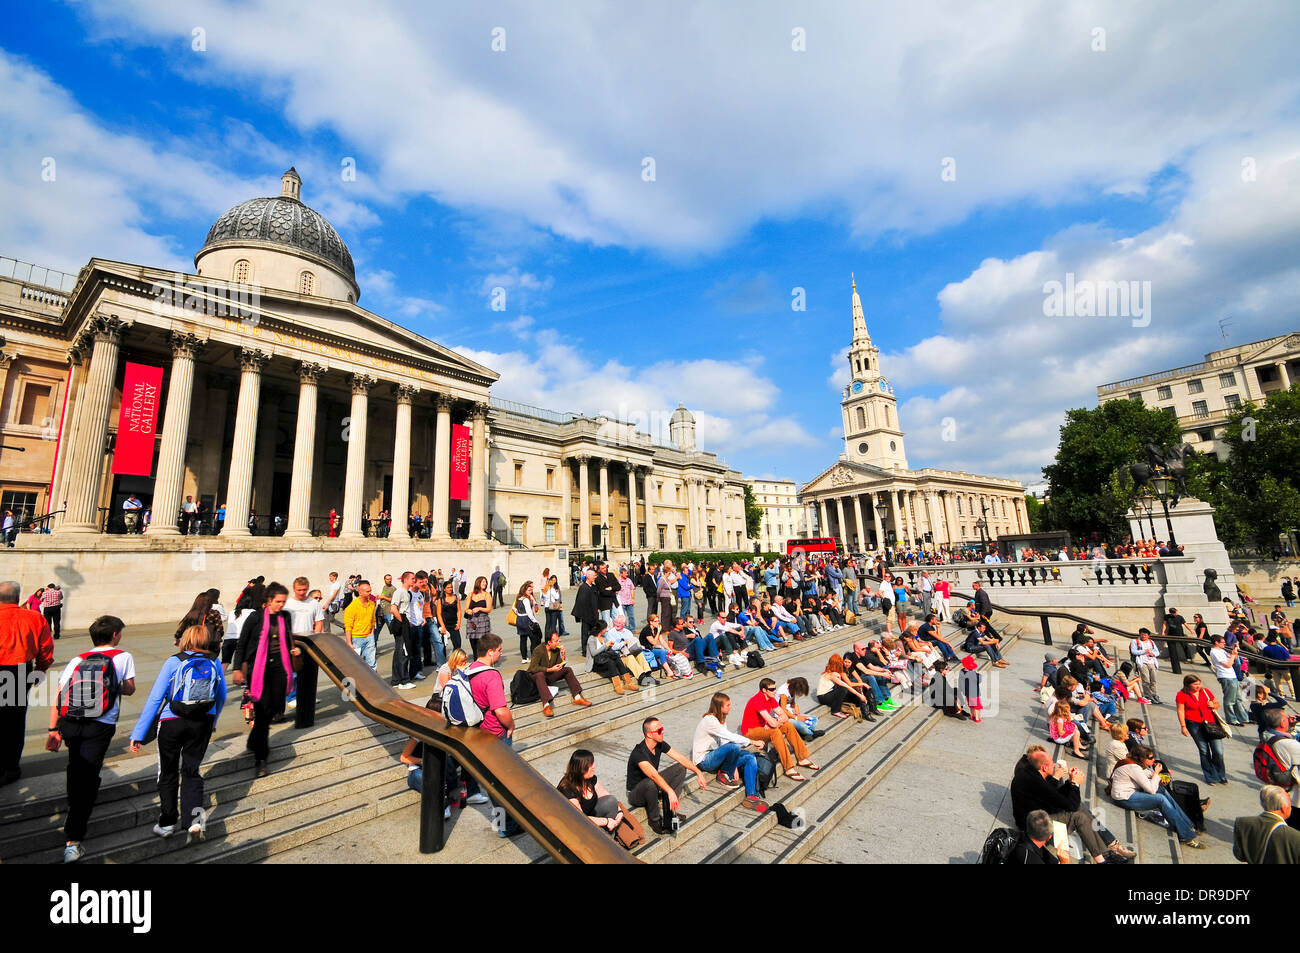 People sitting in front of National Gallery in London Stock Photo